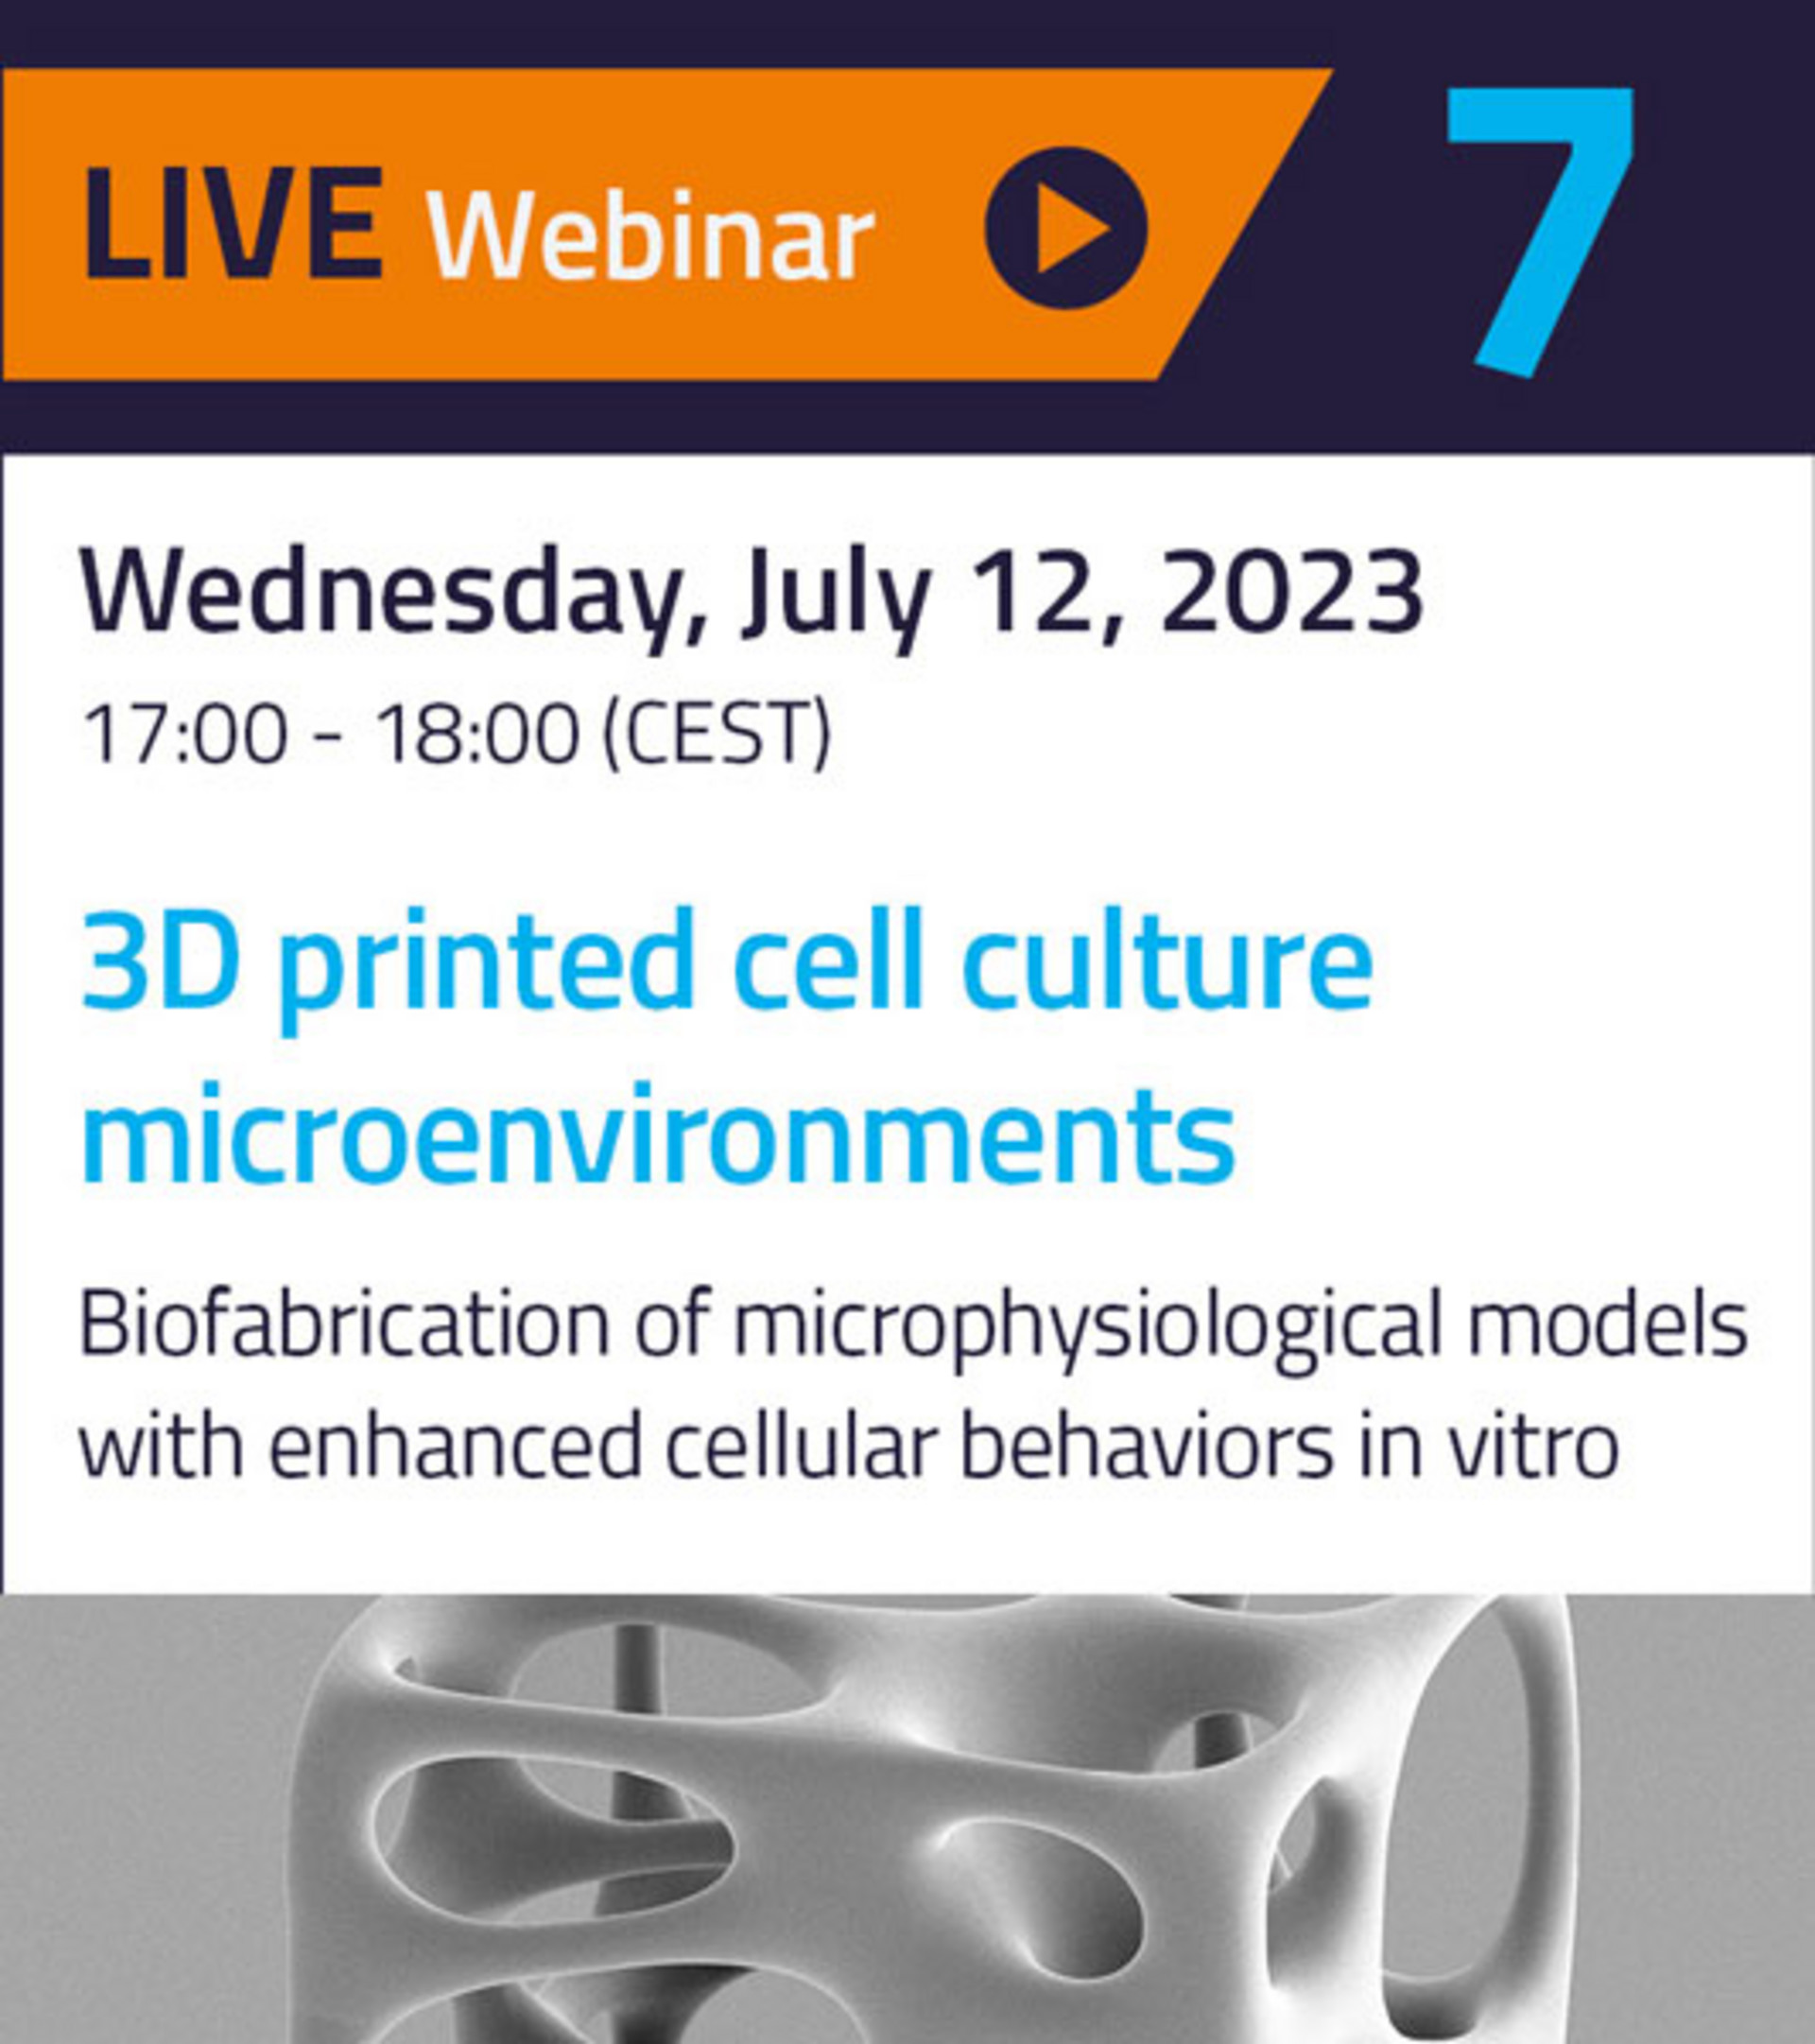 Webinar on 3D printed cell culture microenvironments on July 12, 2023 with Prof. Angelo Accardo and Dr. Benjamin Richter